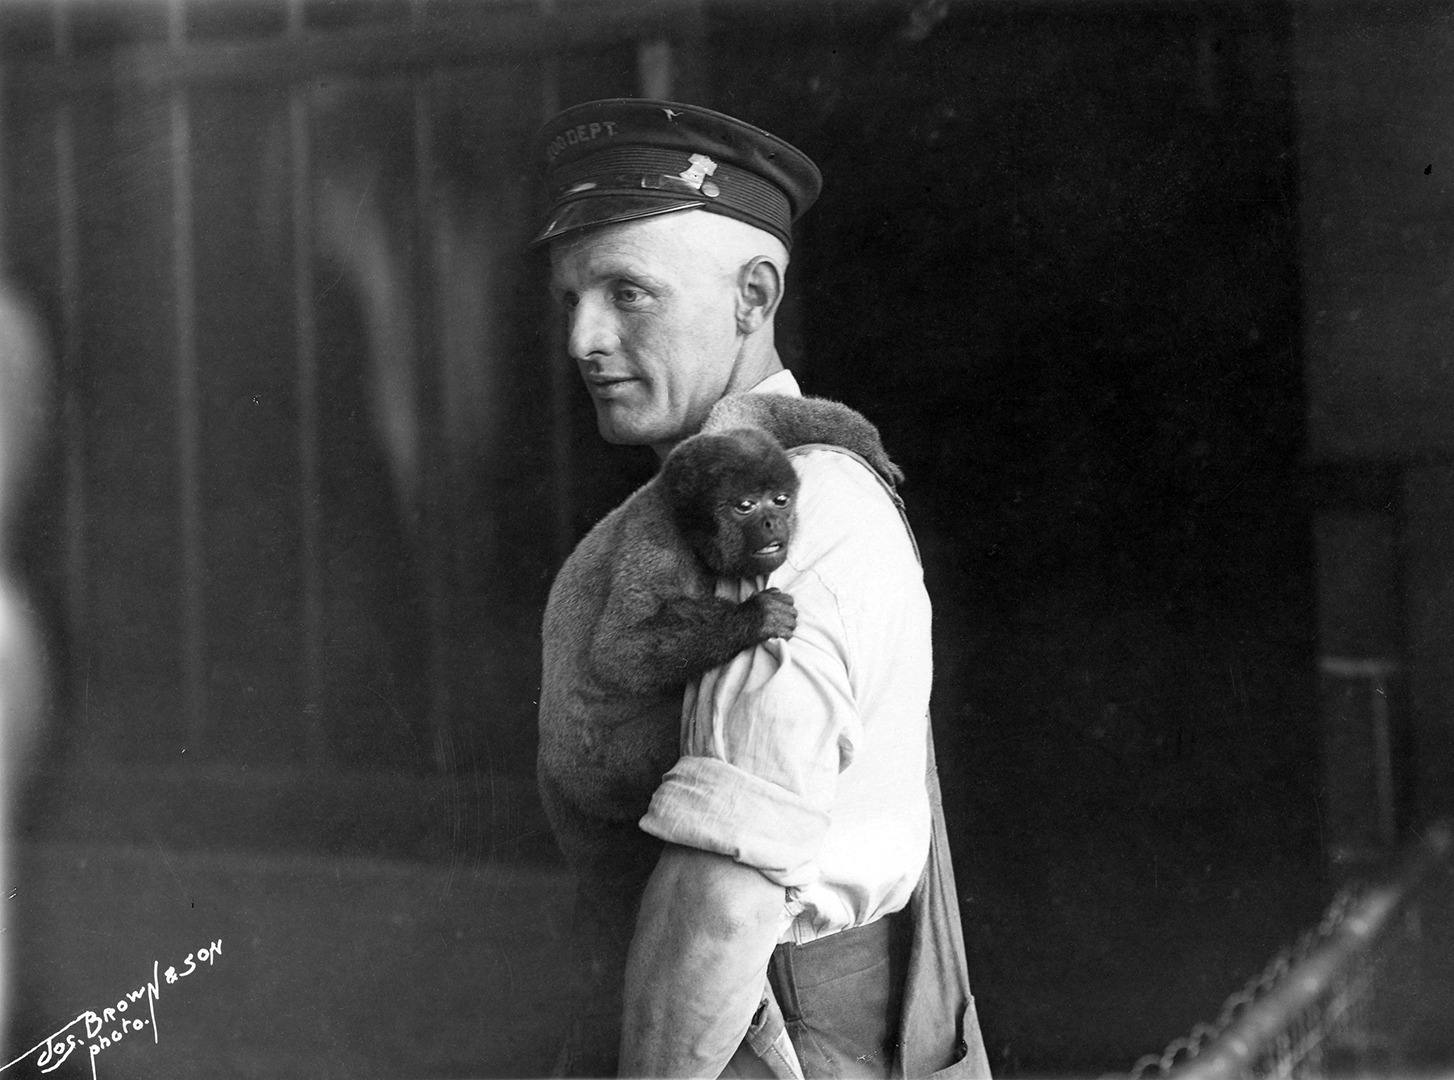 Keeper with monkey